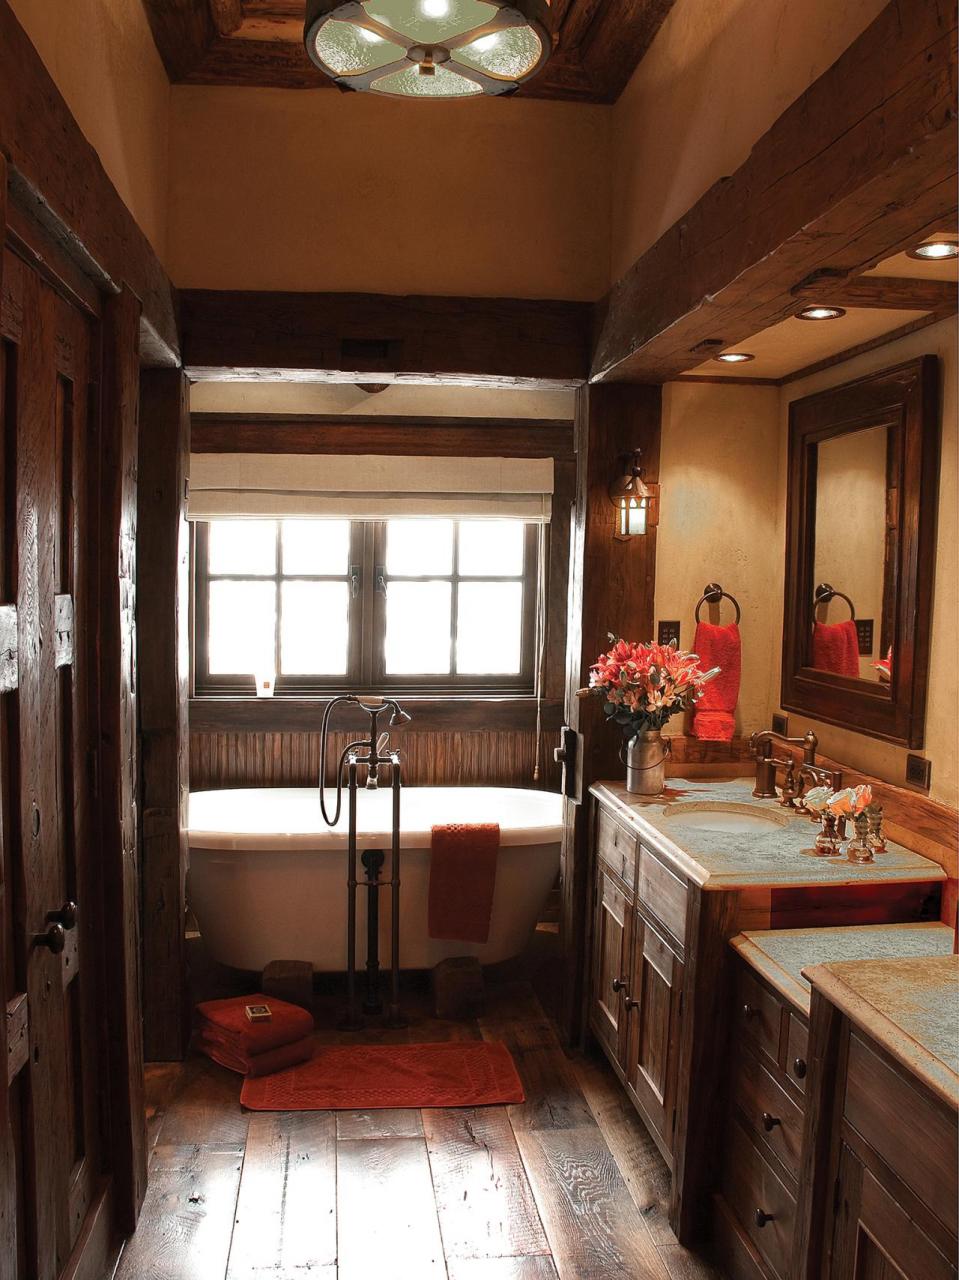 Rustic Bathroom Decor Ideas Pictures & Tips From HGTV HGTV